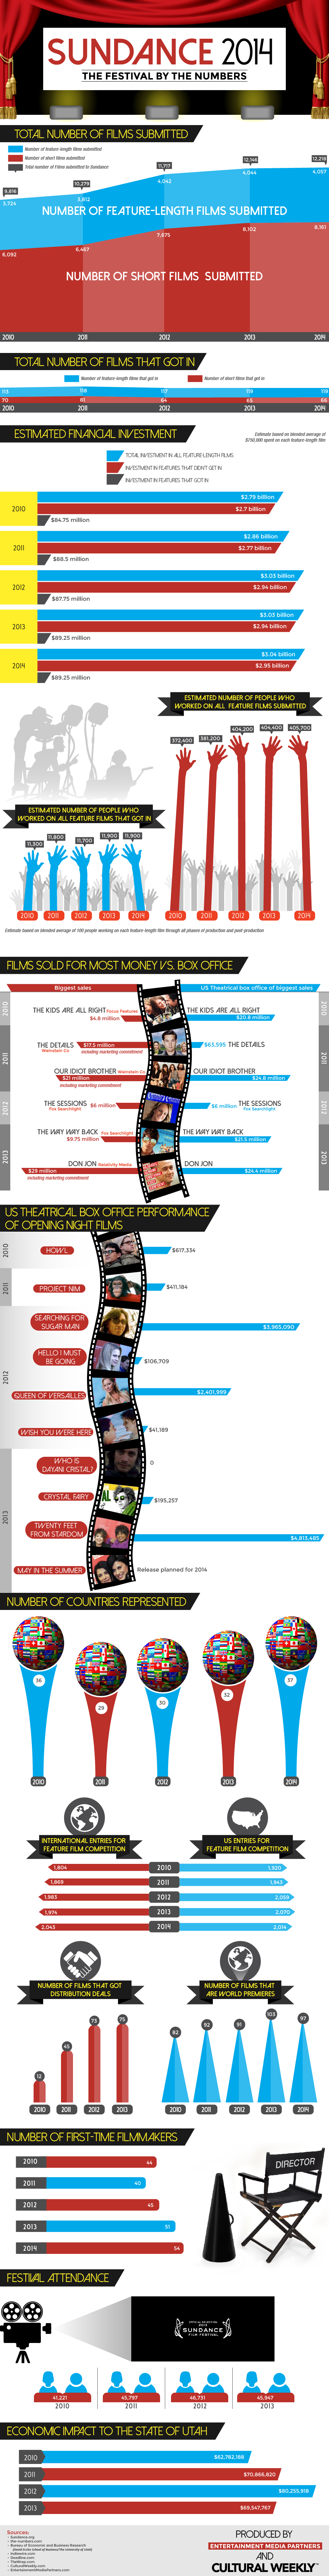 Sundance 2014 Infographic produced by Entertainment Media Partners and Cultural Weekly. 